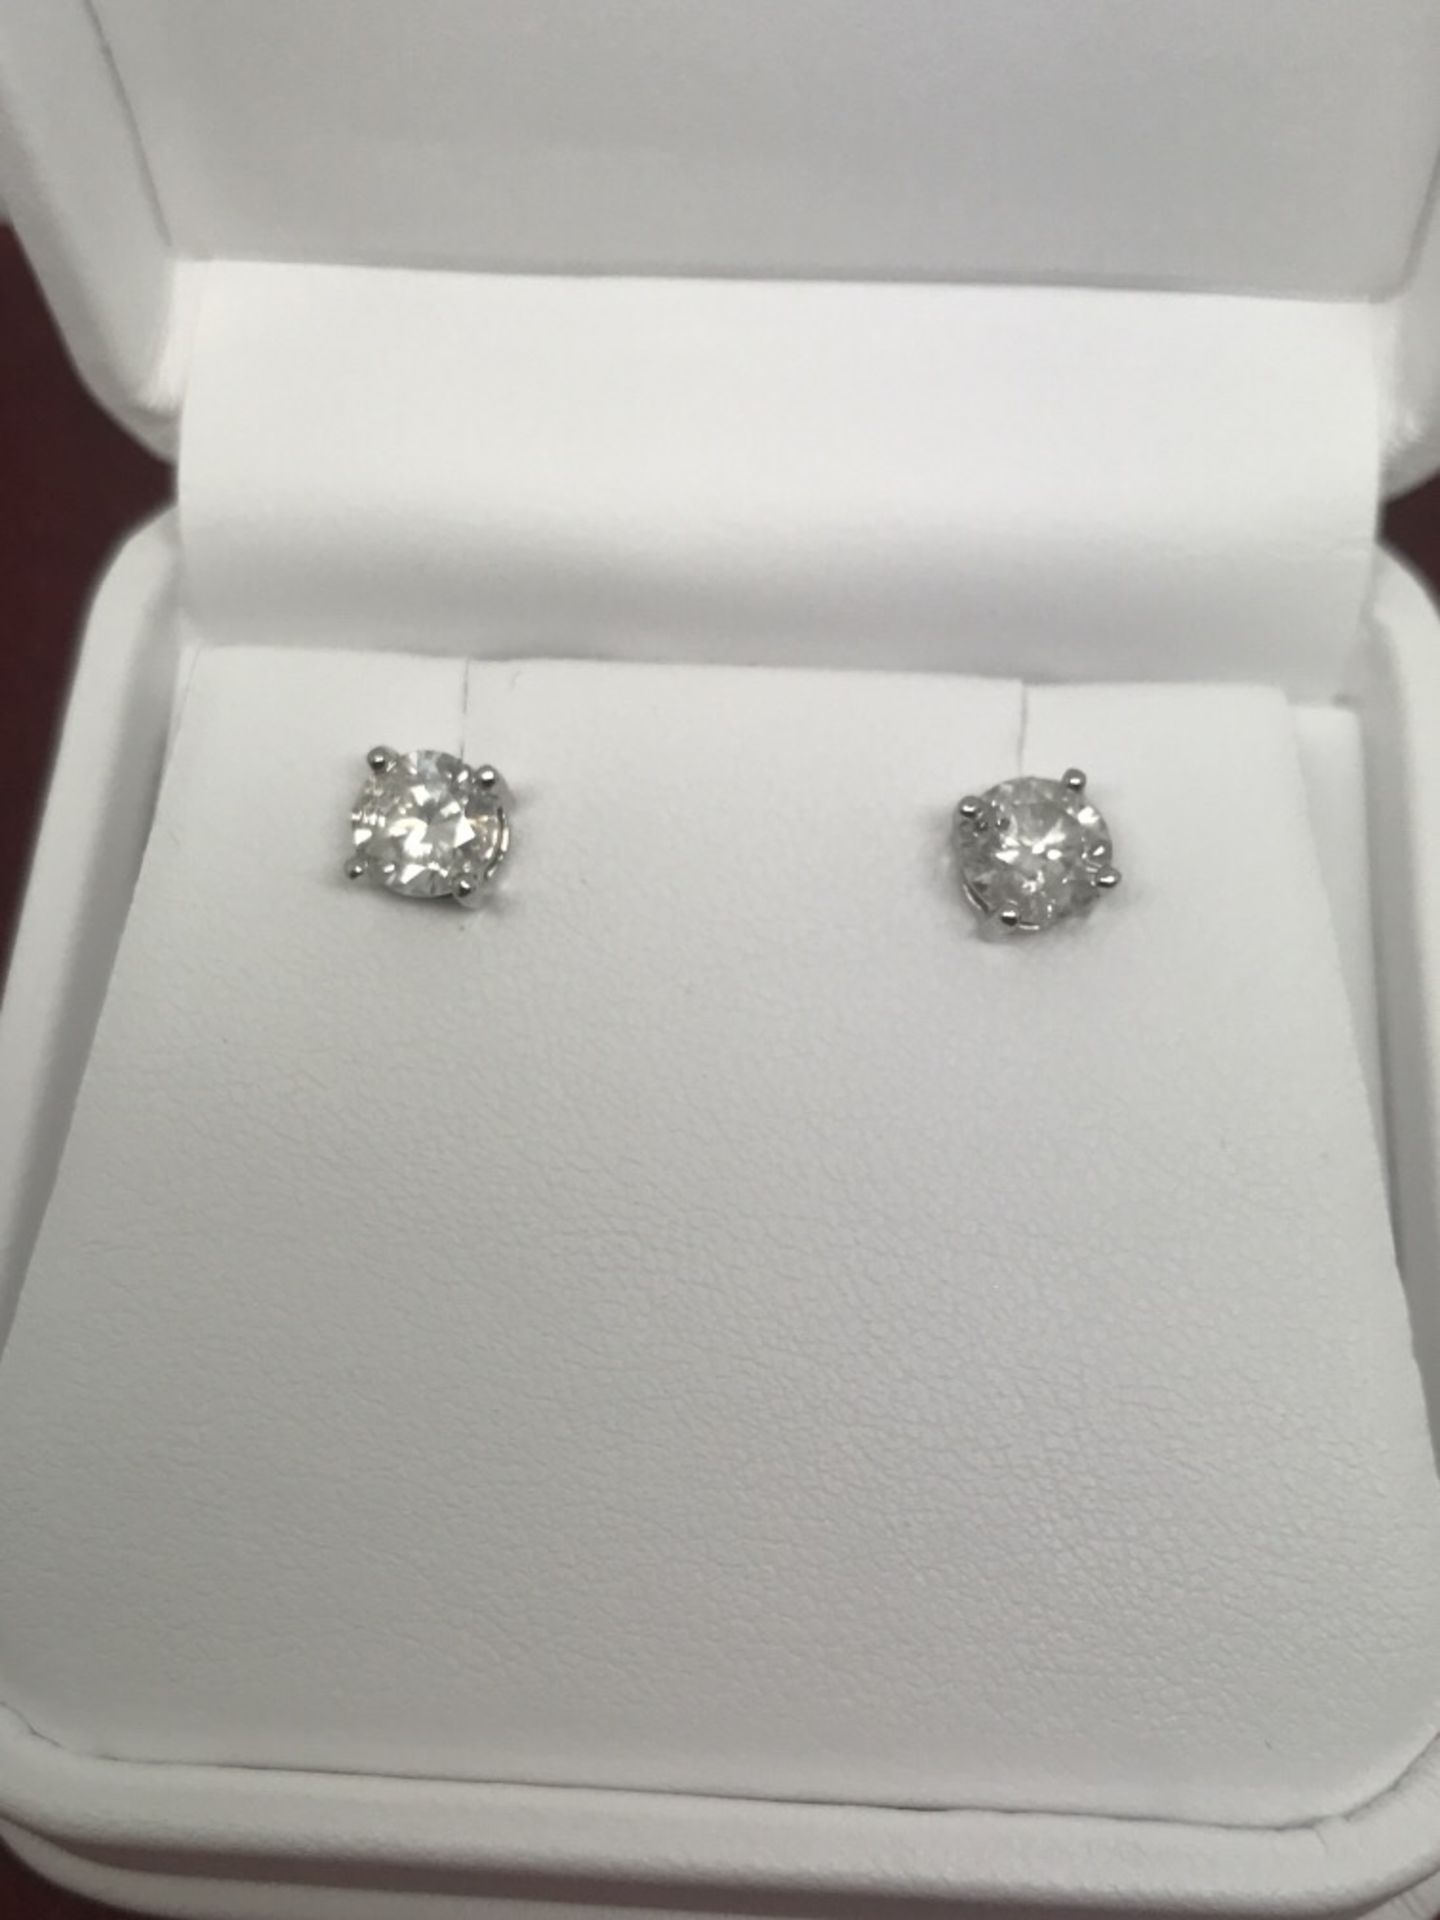 2.10cts DIAMOND EARRINGS SET IN 18ct WHITE GOLD - Image 3 of 7